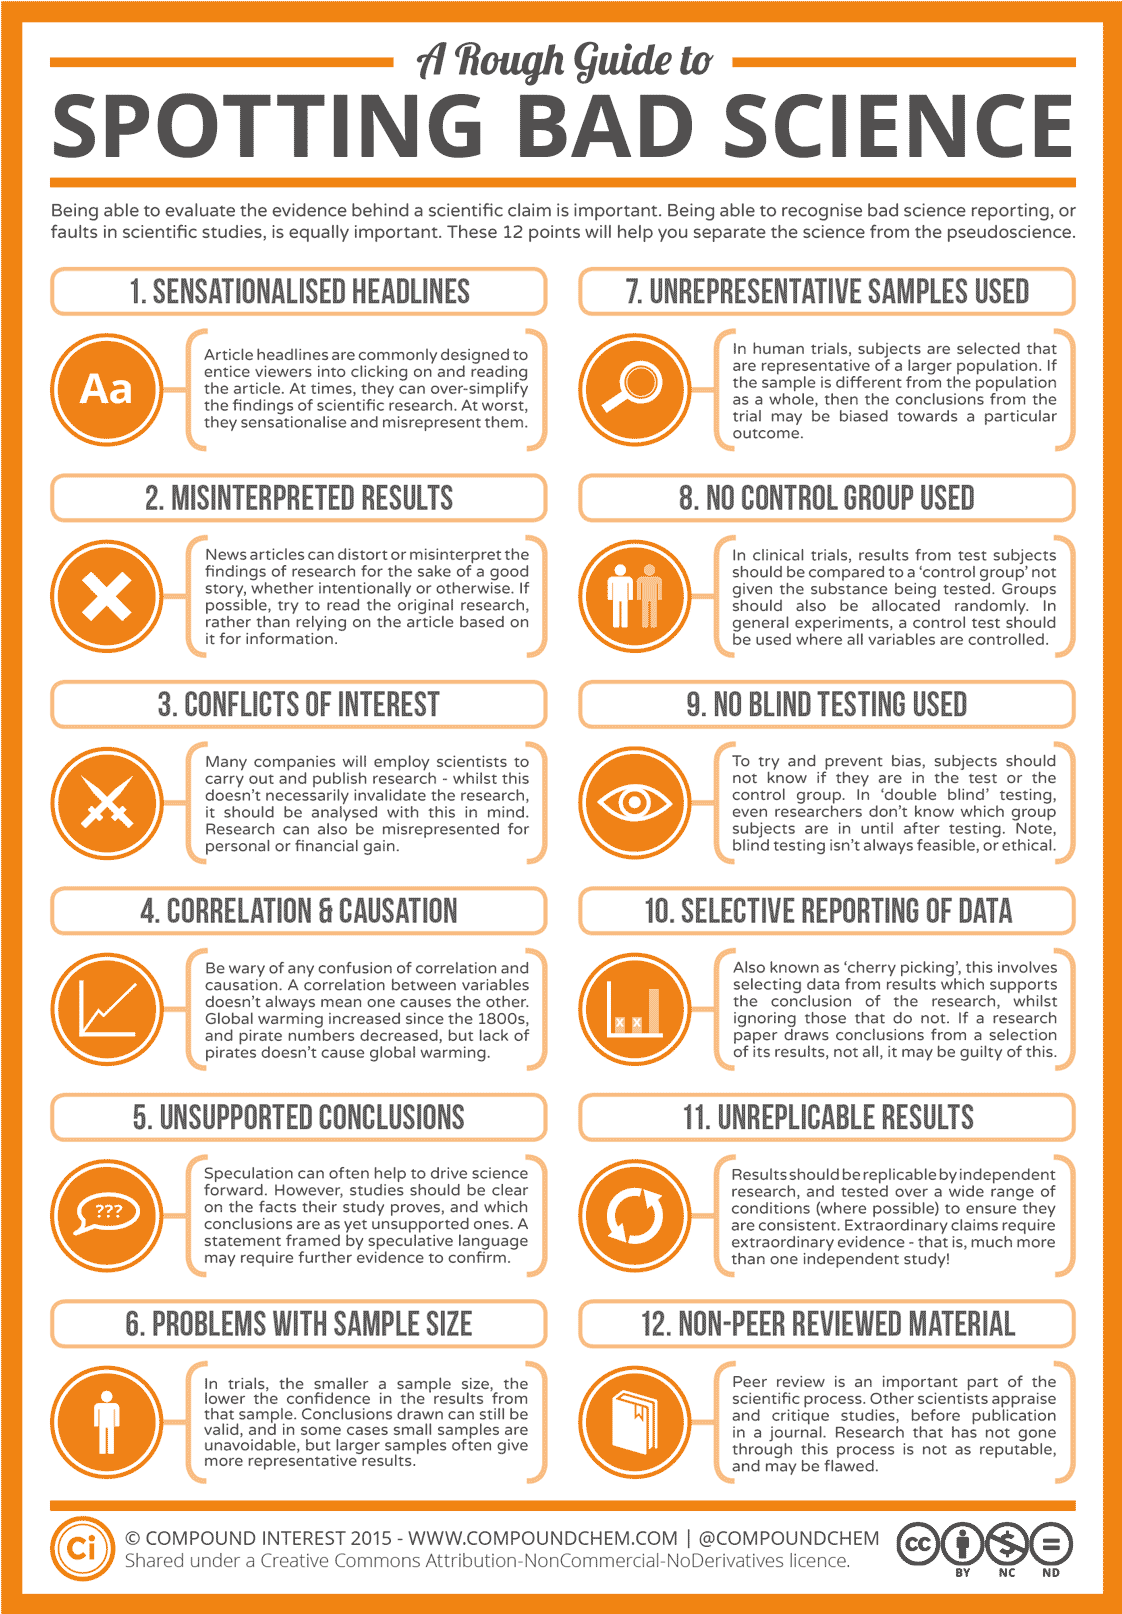 Infographic - A Rough Guide to Spotting Bad Science 2015